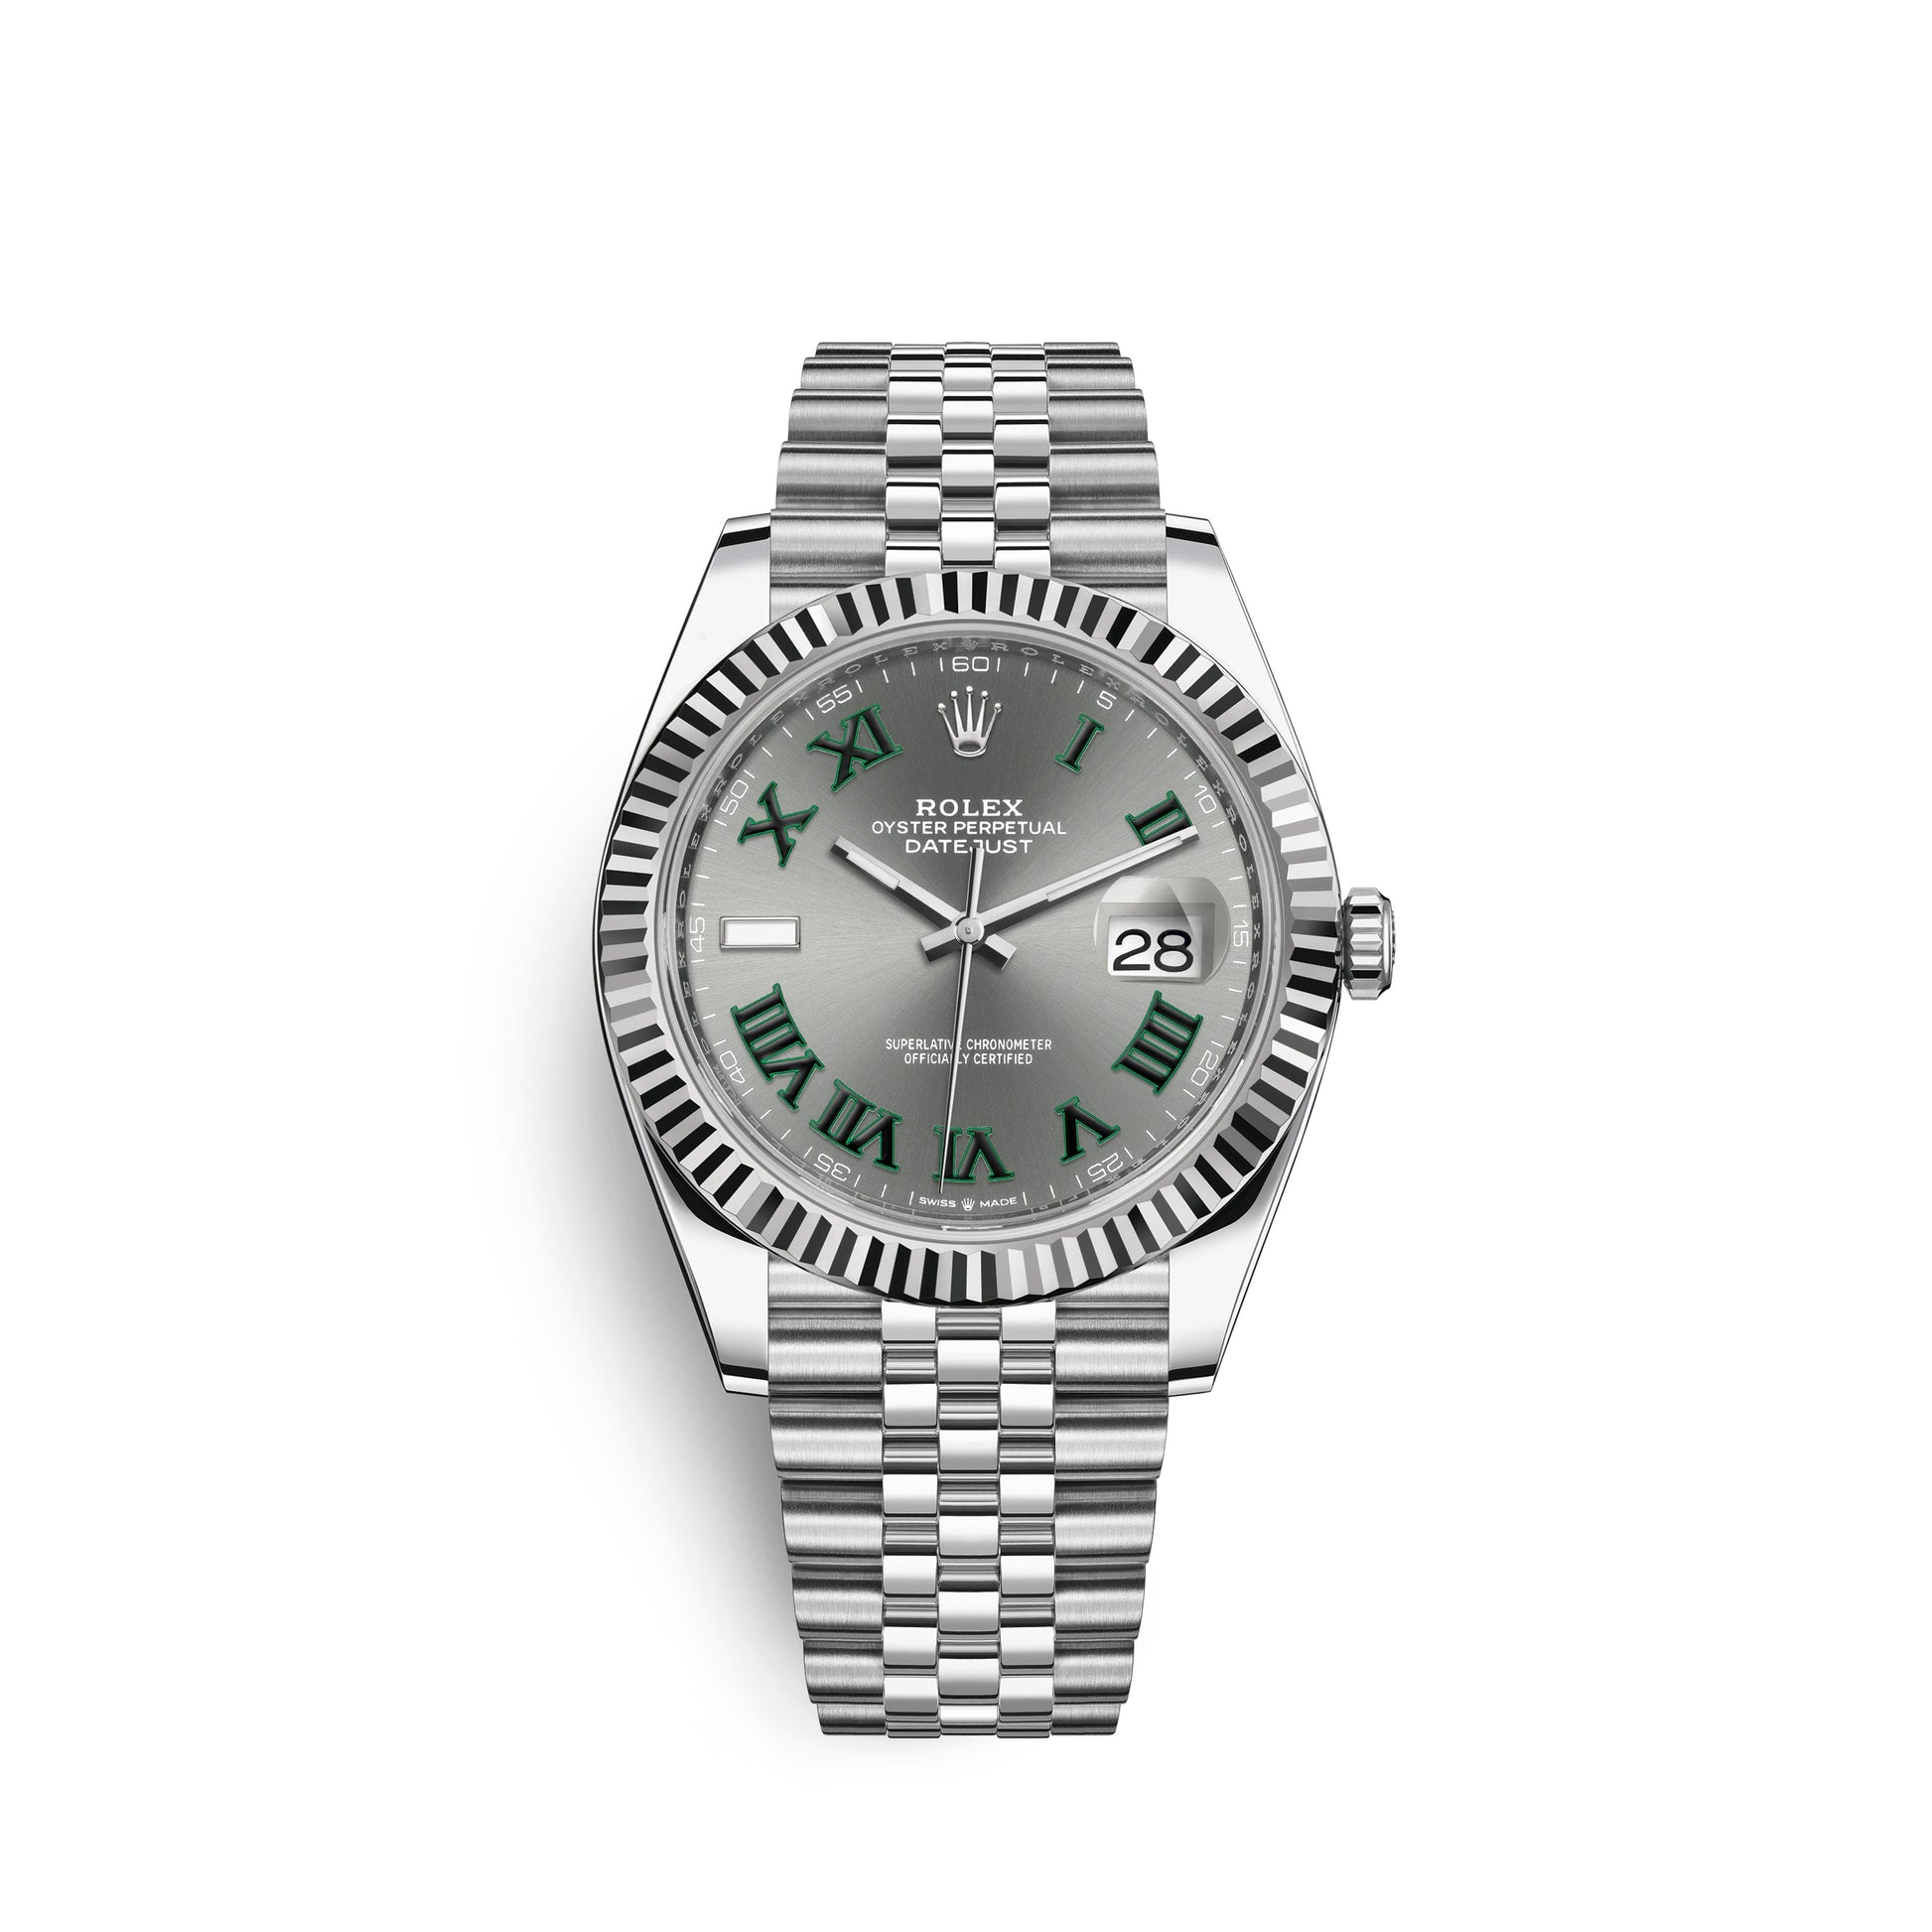 Rolex Datejust Stainless Steel and 18k White Gold, 41mm, Ref# 1263 – Affordable Swiss Watches Inc.